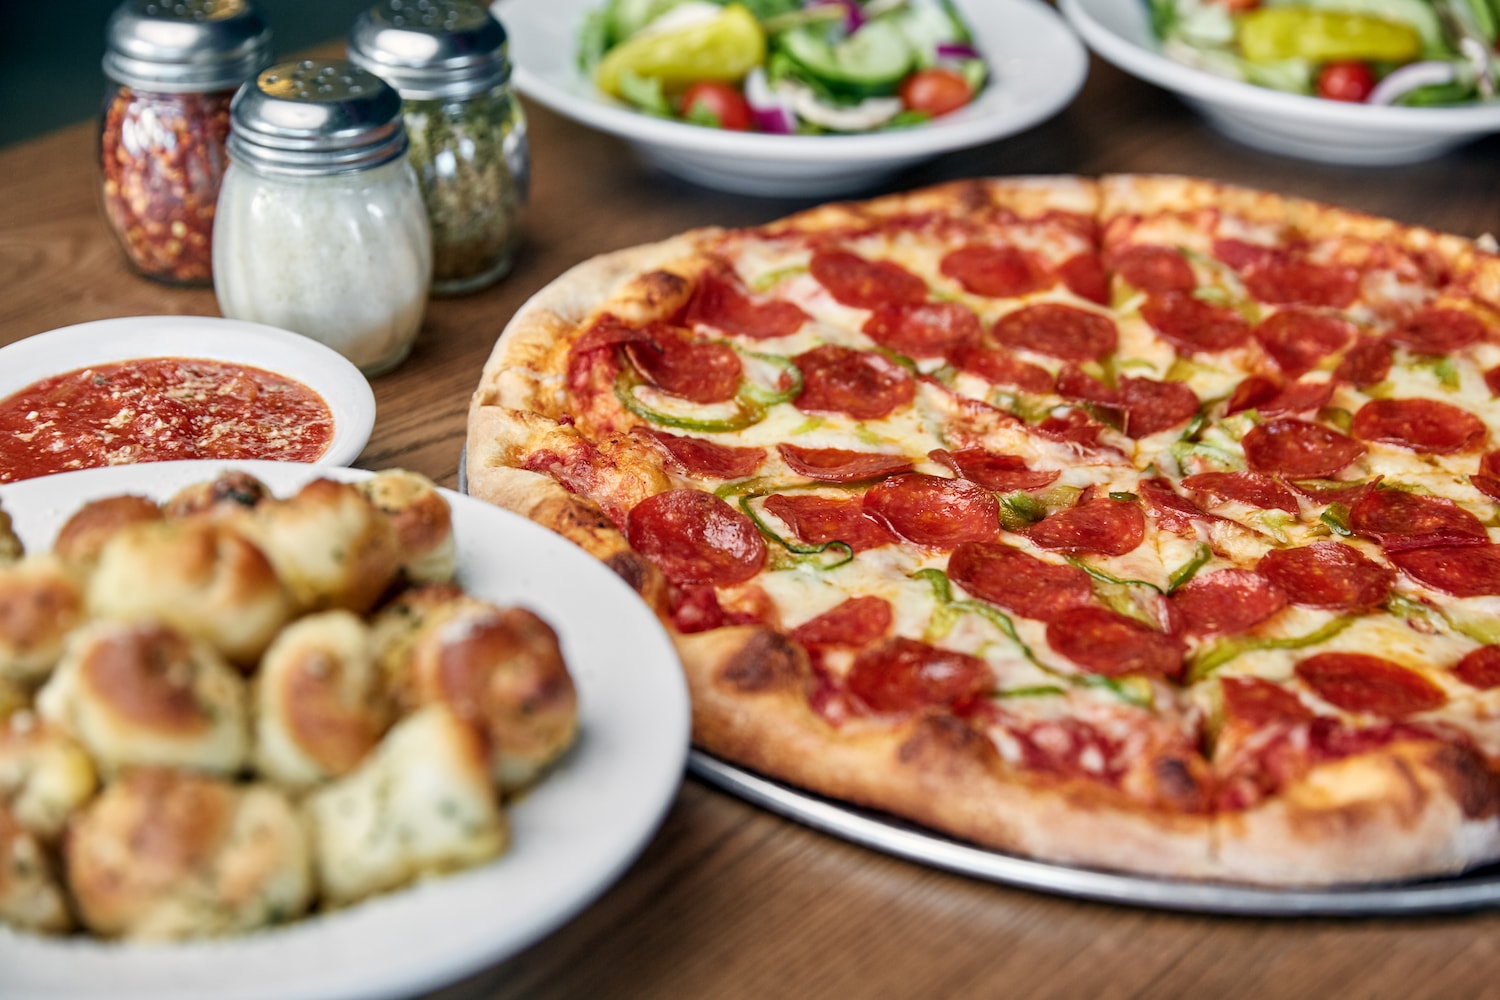 Johnny's New York Style Pizza Coupons near me in Hapeville, GA 30354 | 8coupons